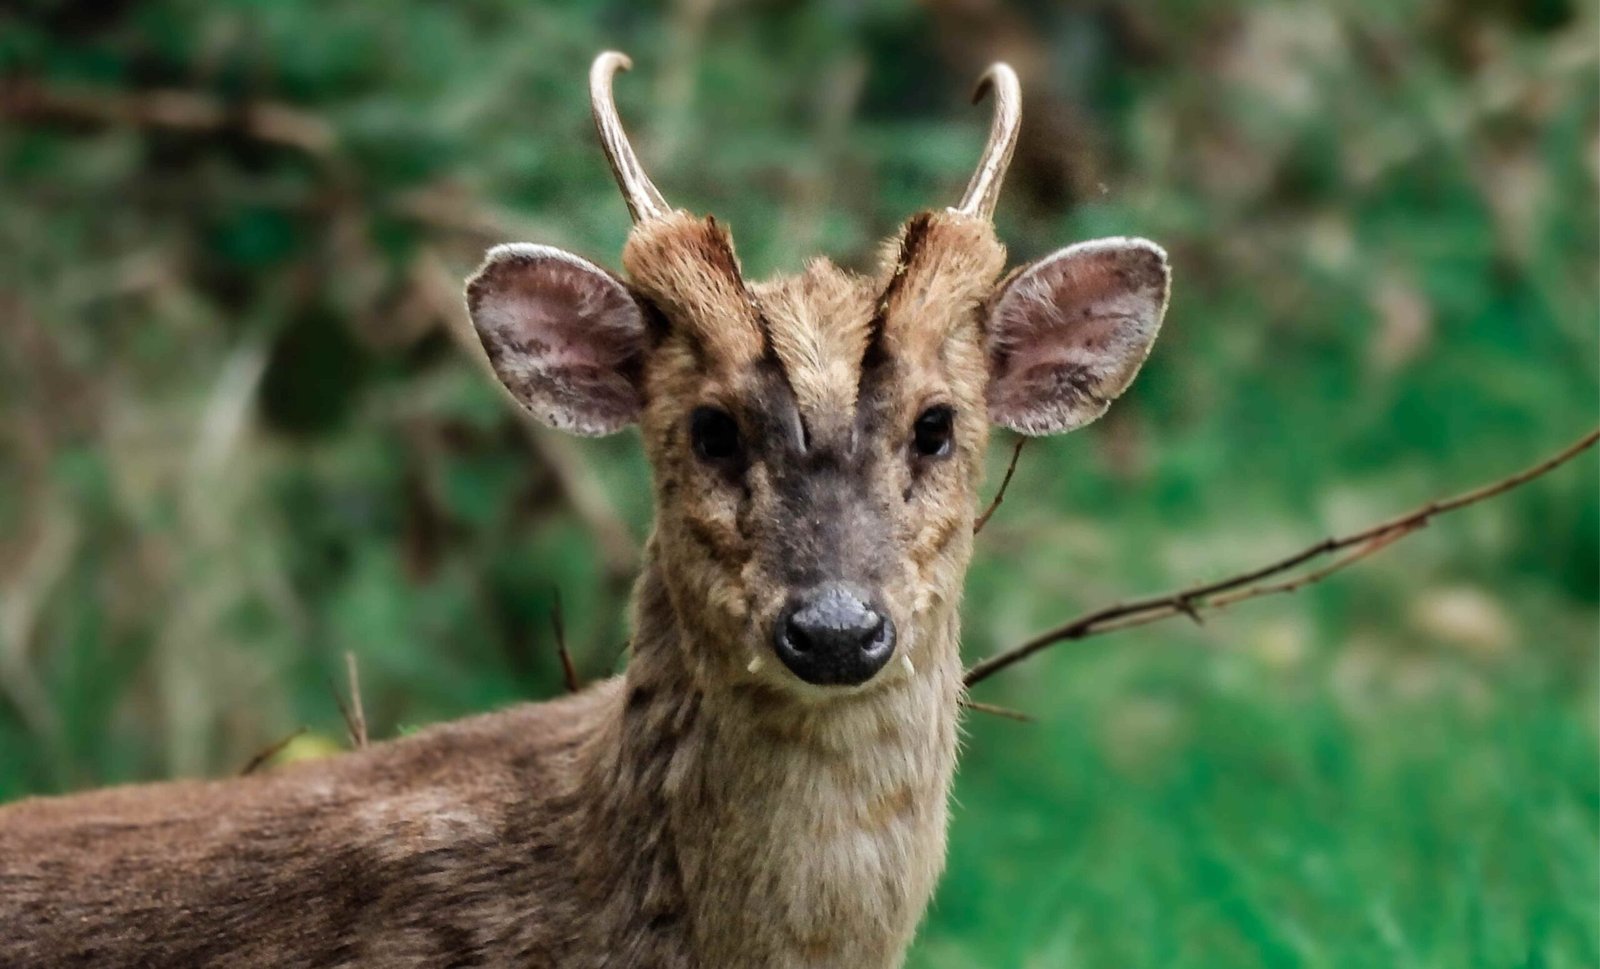 The Holes on the Face of Muntjac Deer